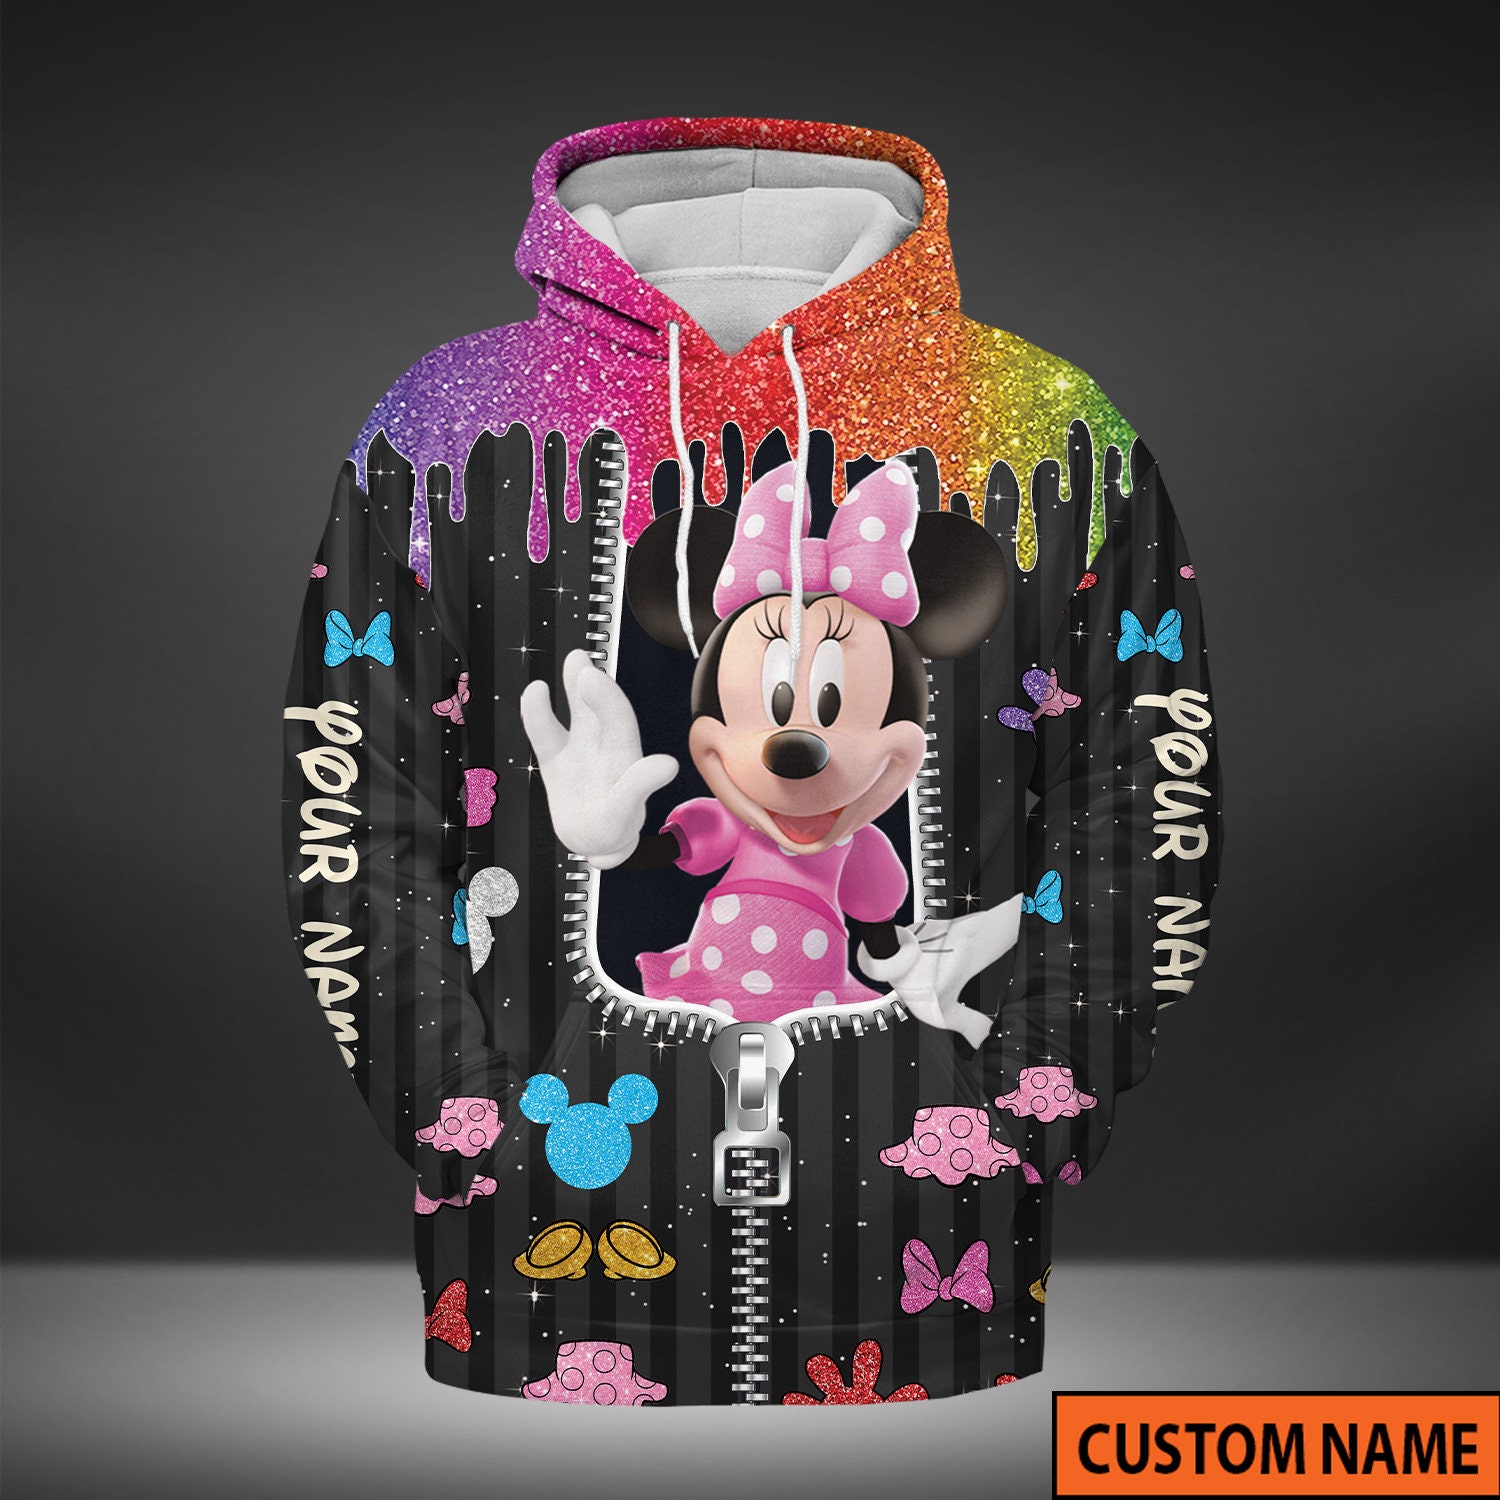 Discover Minnie Mouse 3D Hoodie, Minnie Mouse Shirts, Minnie Hoodie, Hoodie For Men/Women, Minnie Disney Tee, Minnie Mouse Gifts, Custom Name Shirt